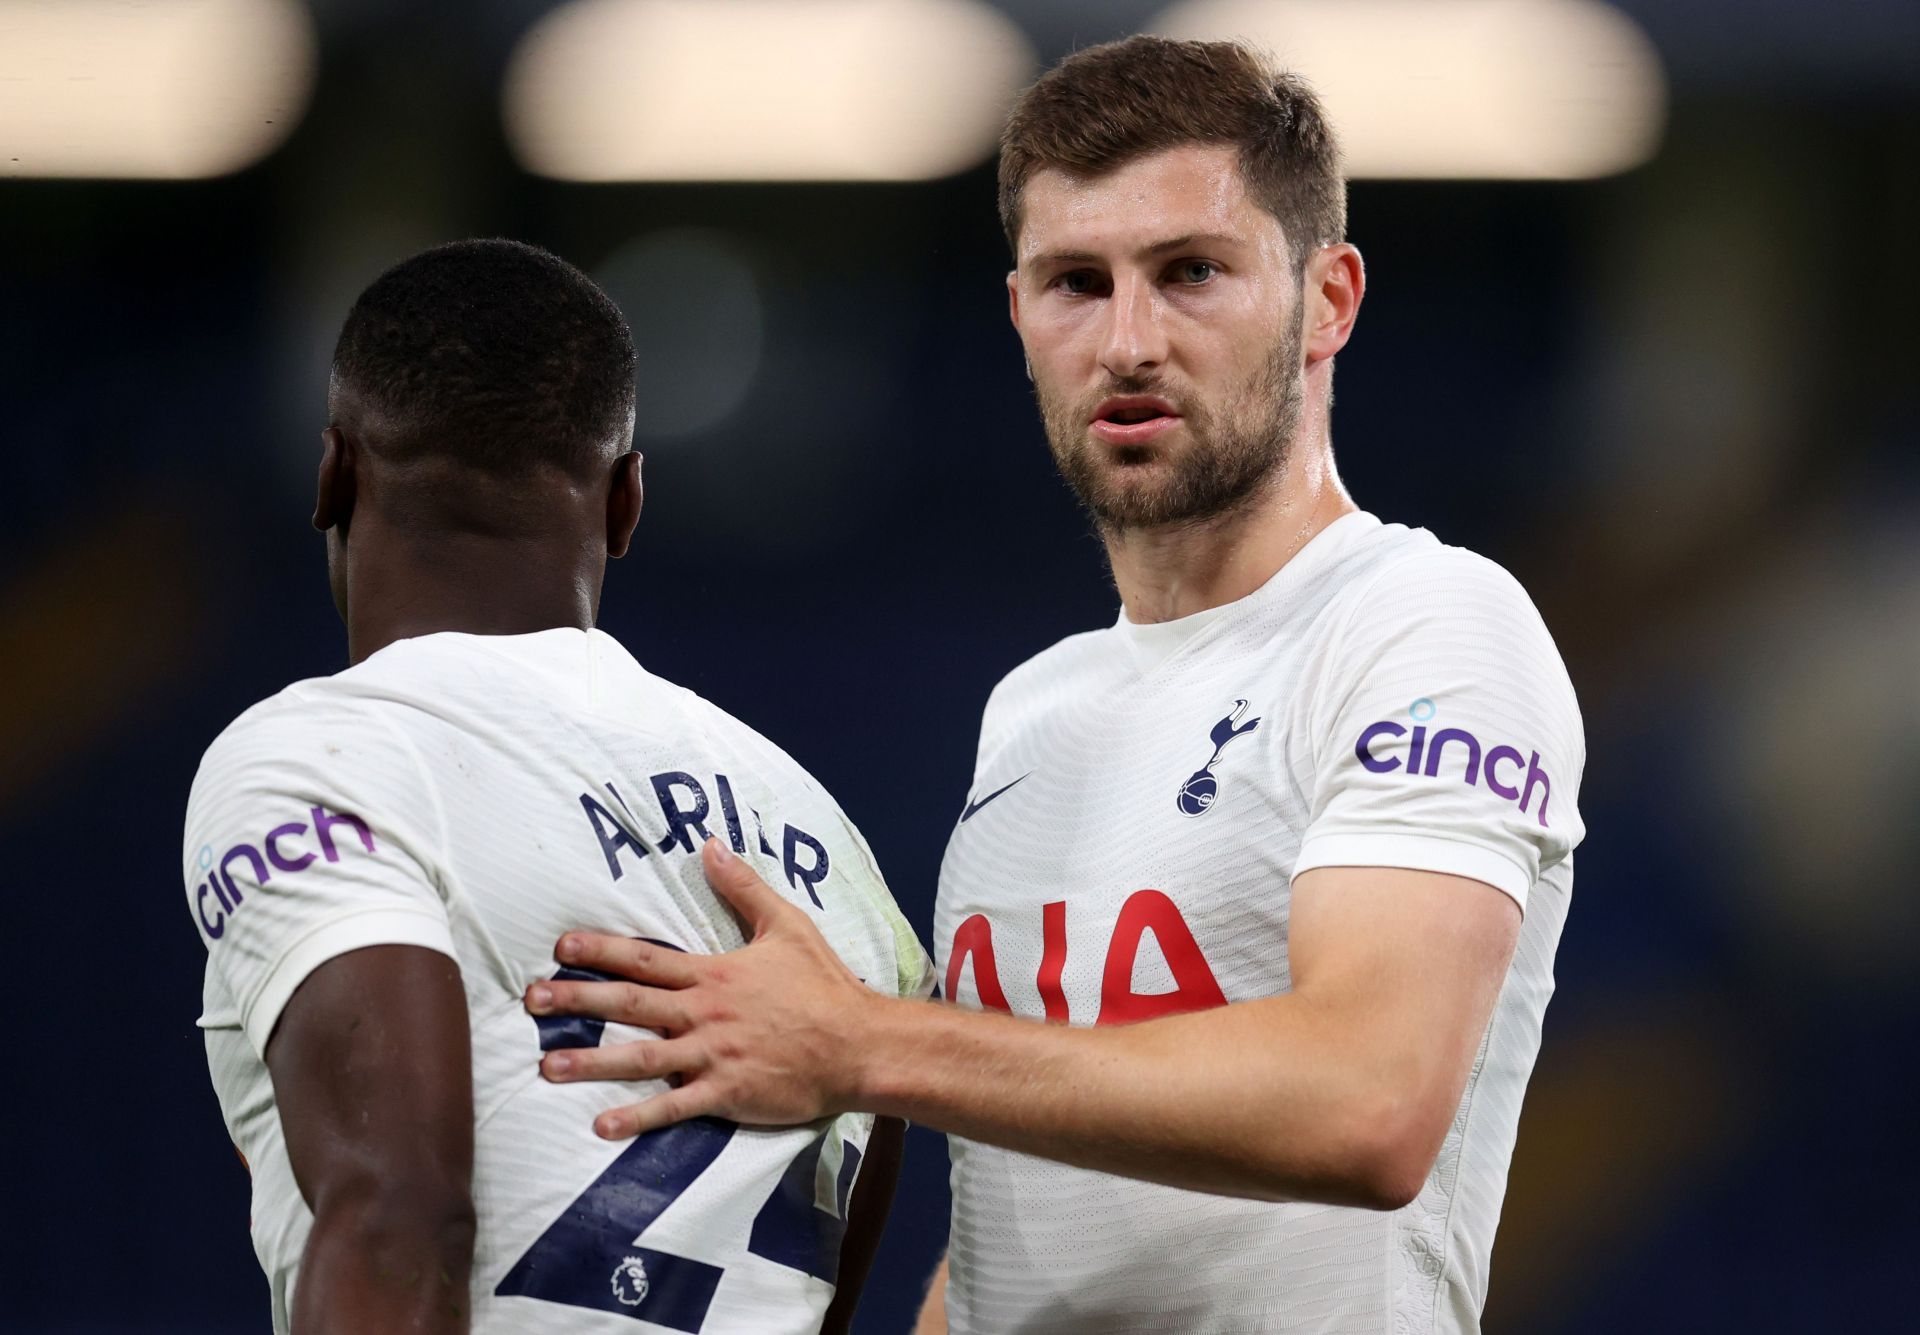 Davies has not given enough confident performances in a Tottenham shirt recently